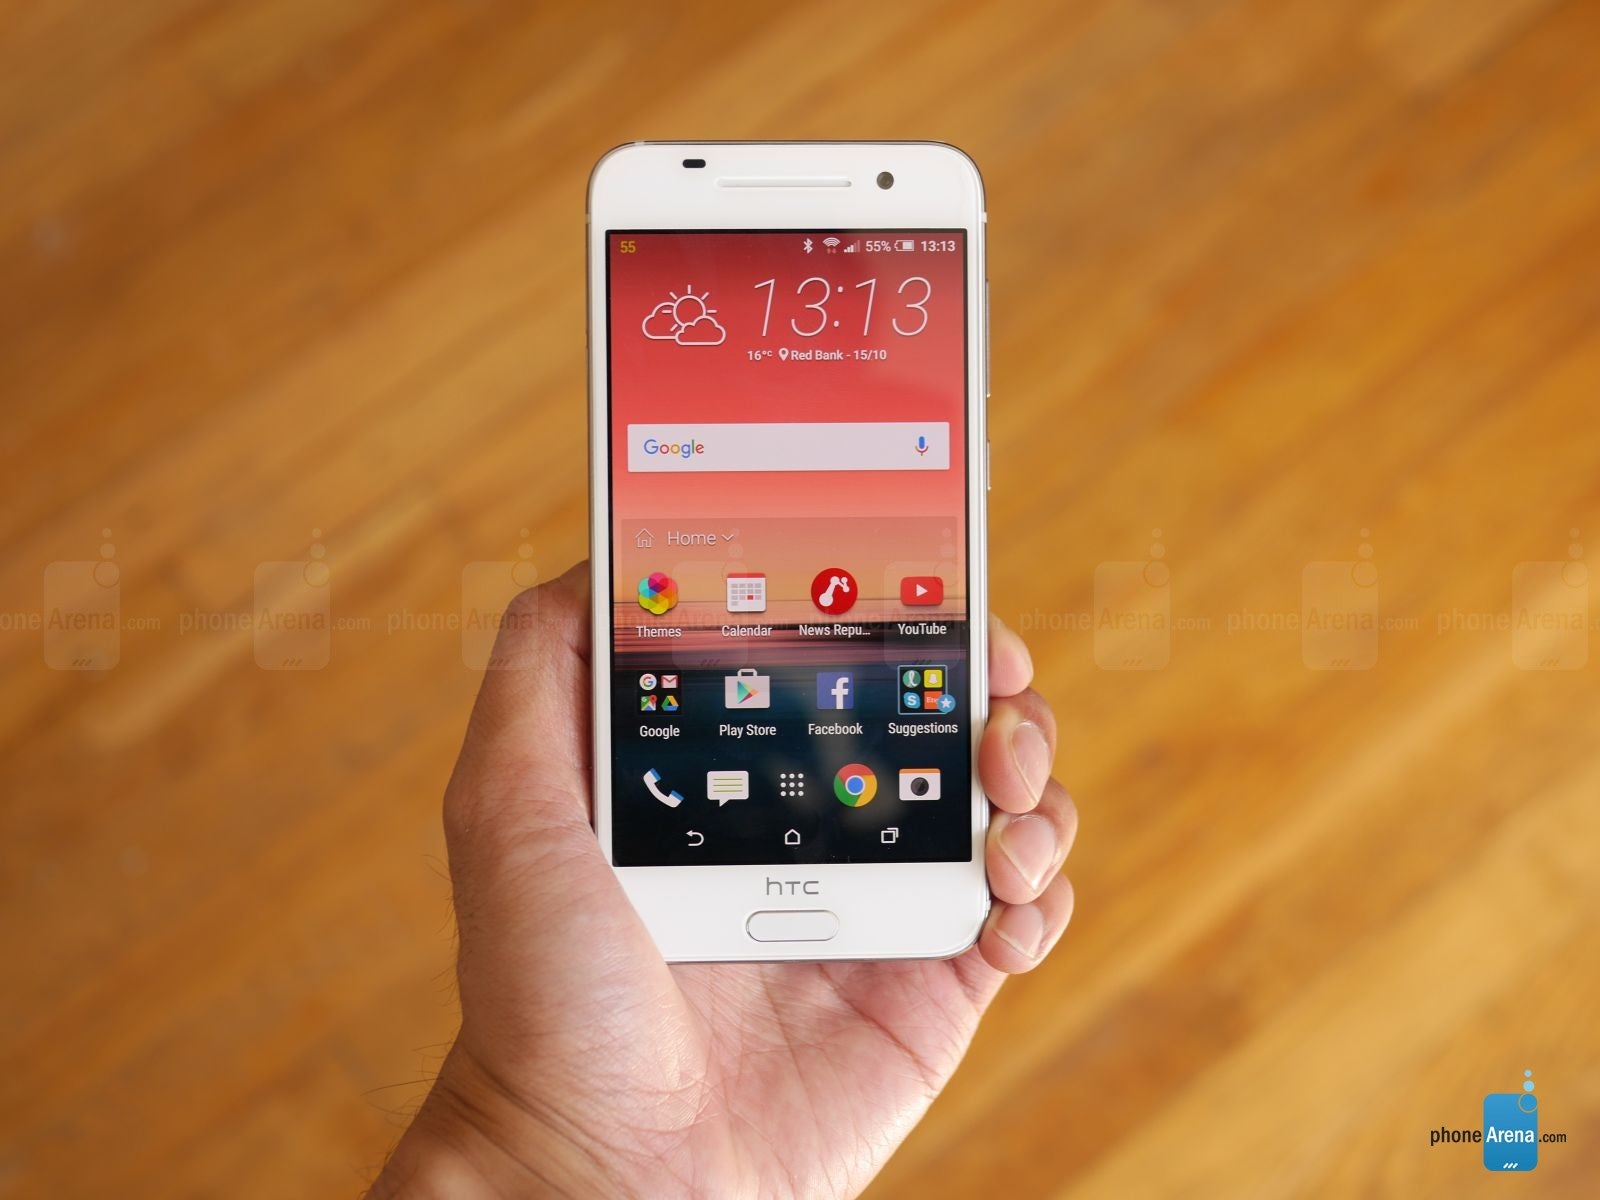 HTC Sense 7.0 running on top of Android 6.0 Marshmallow - HTC One A9 hands-on